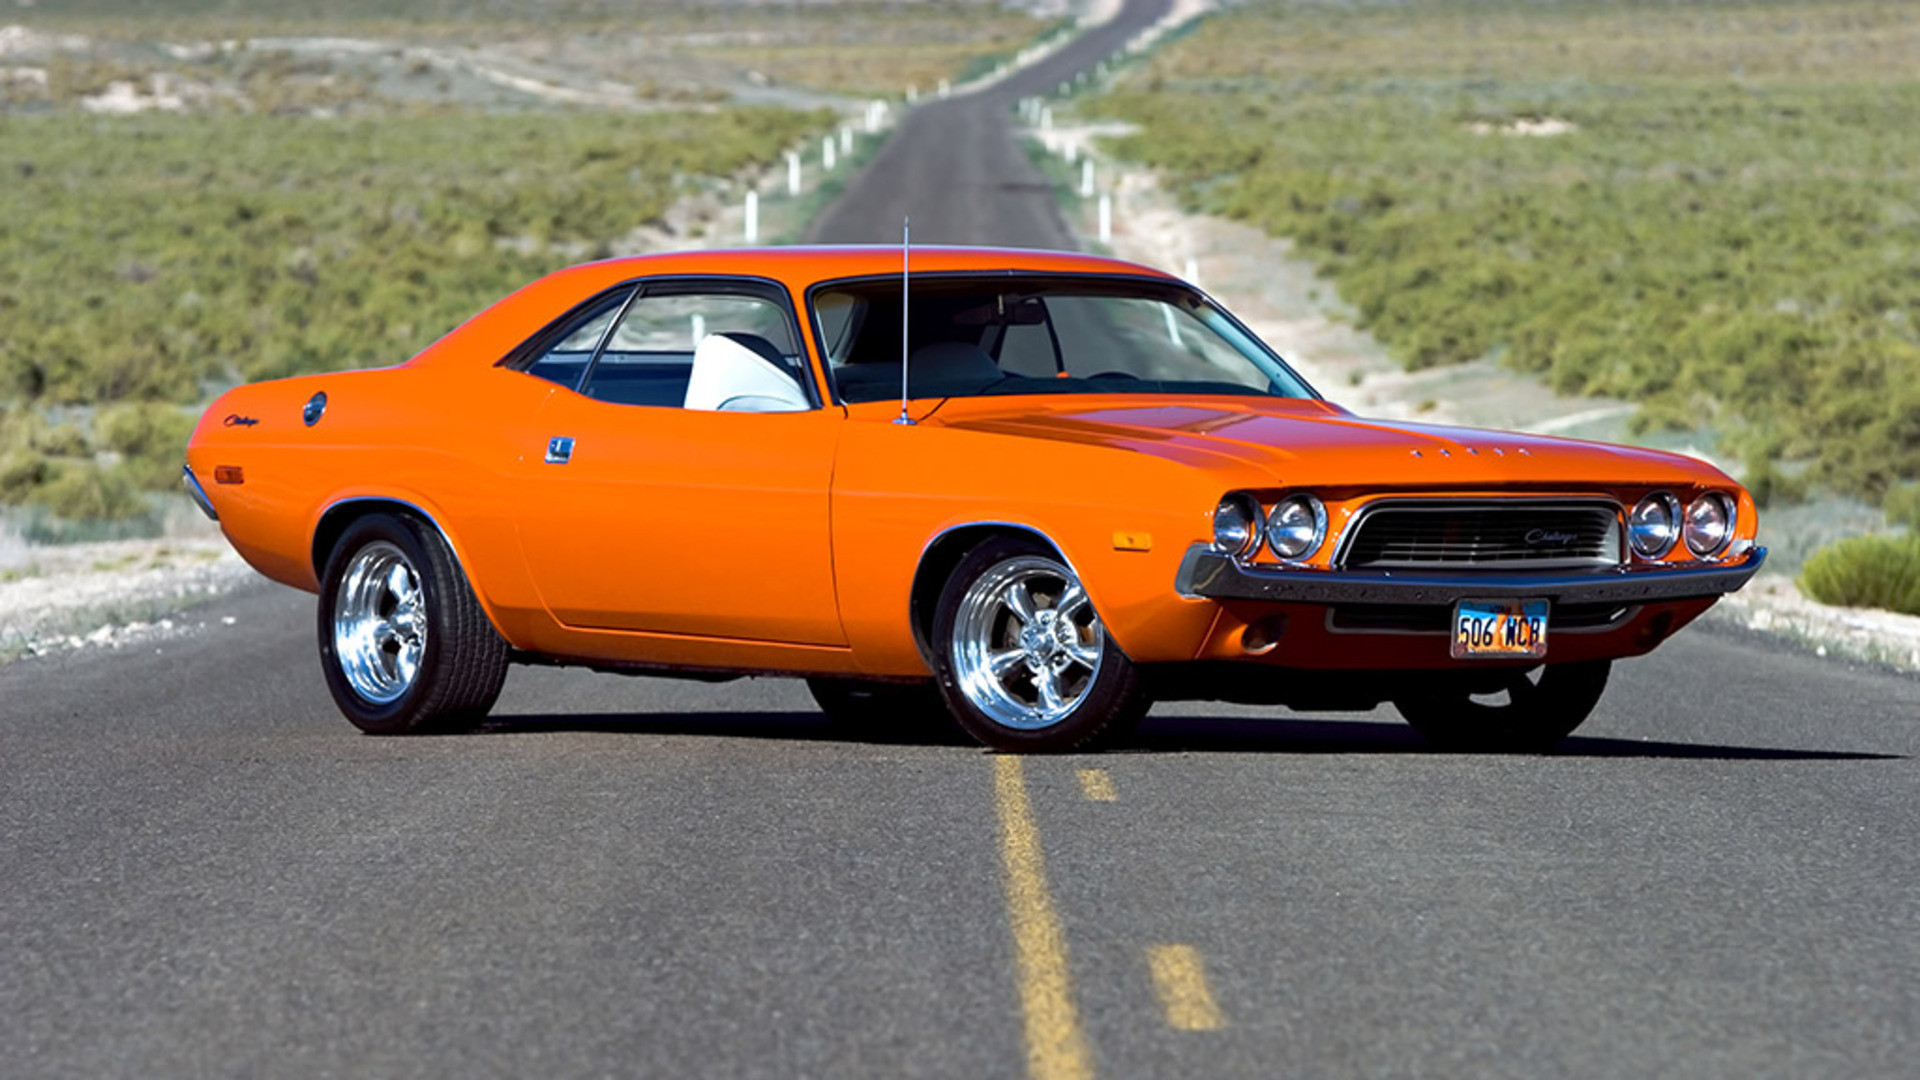 Old Muscle Cars Wallpaper 2014 Hd Data-src /w/full/6/5/9/35935 - Cars  Background For Photoshop - 1920x1080 Wallpaper 